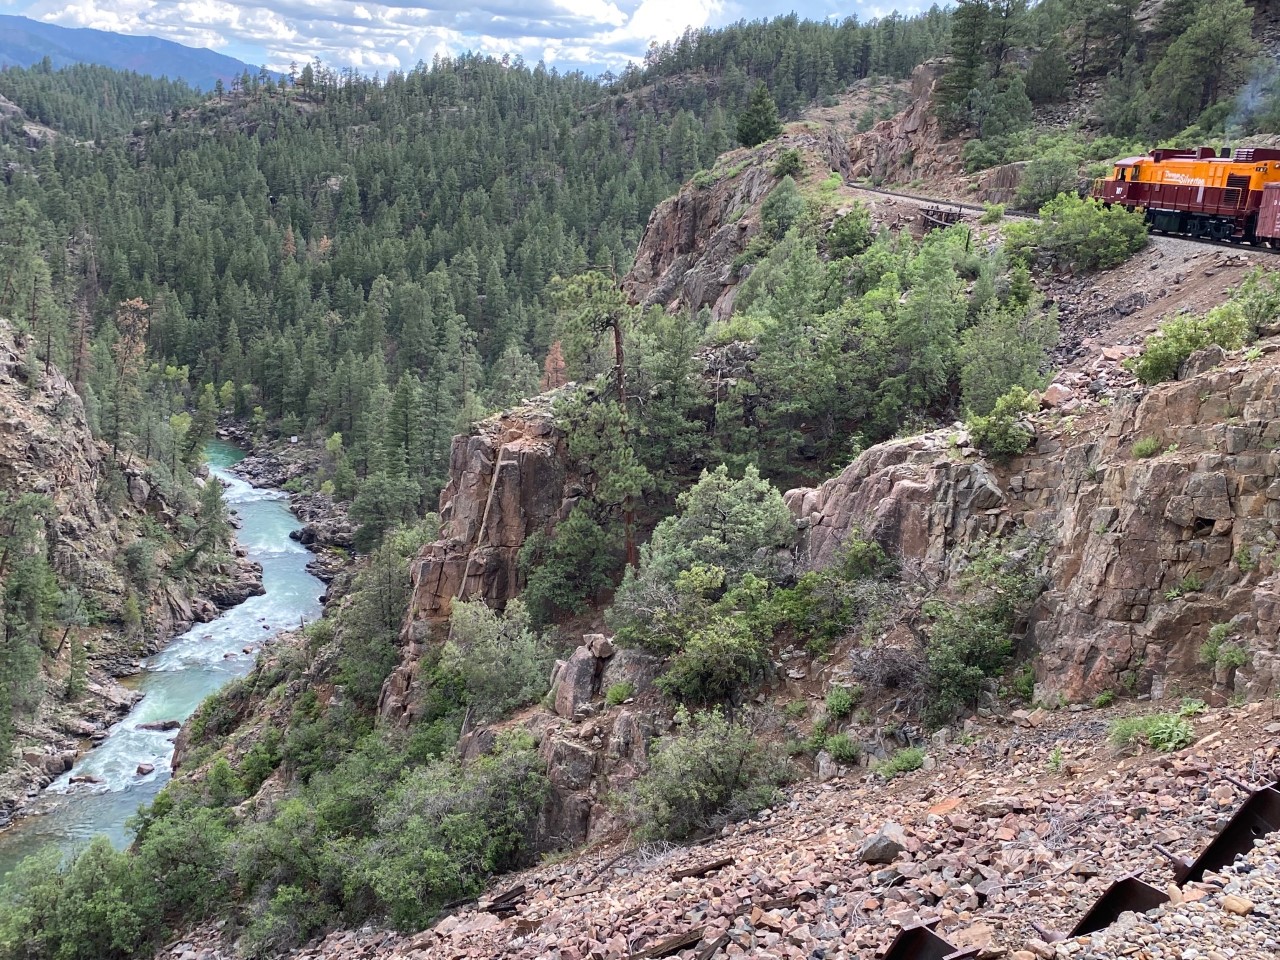 Views as train moves above the river canyon